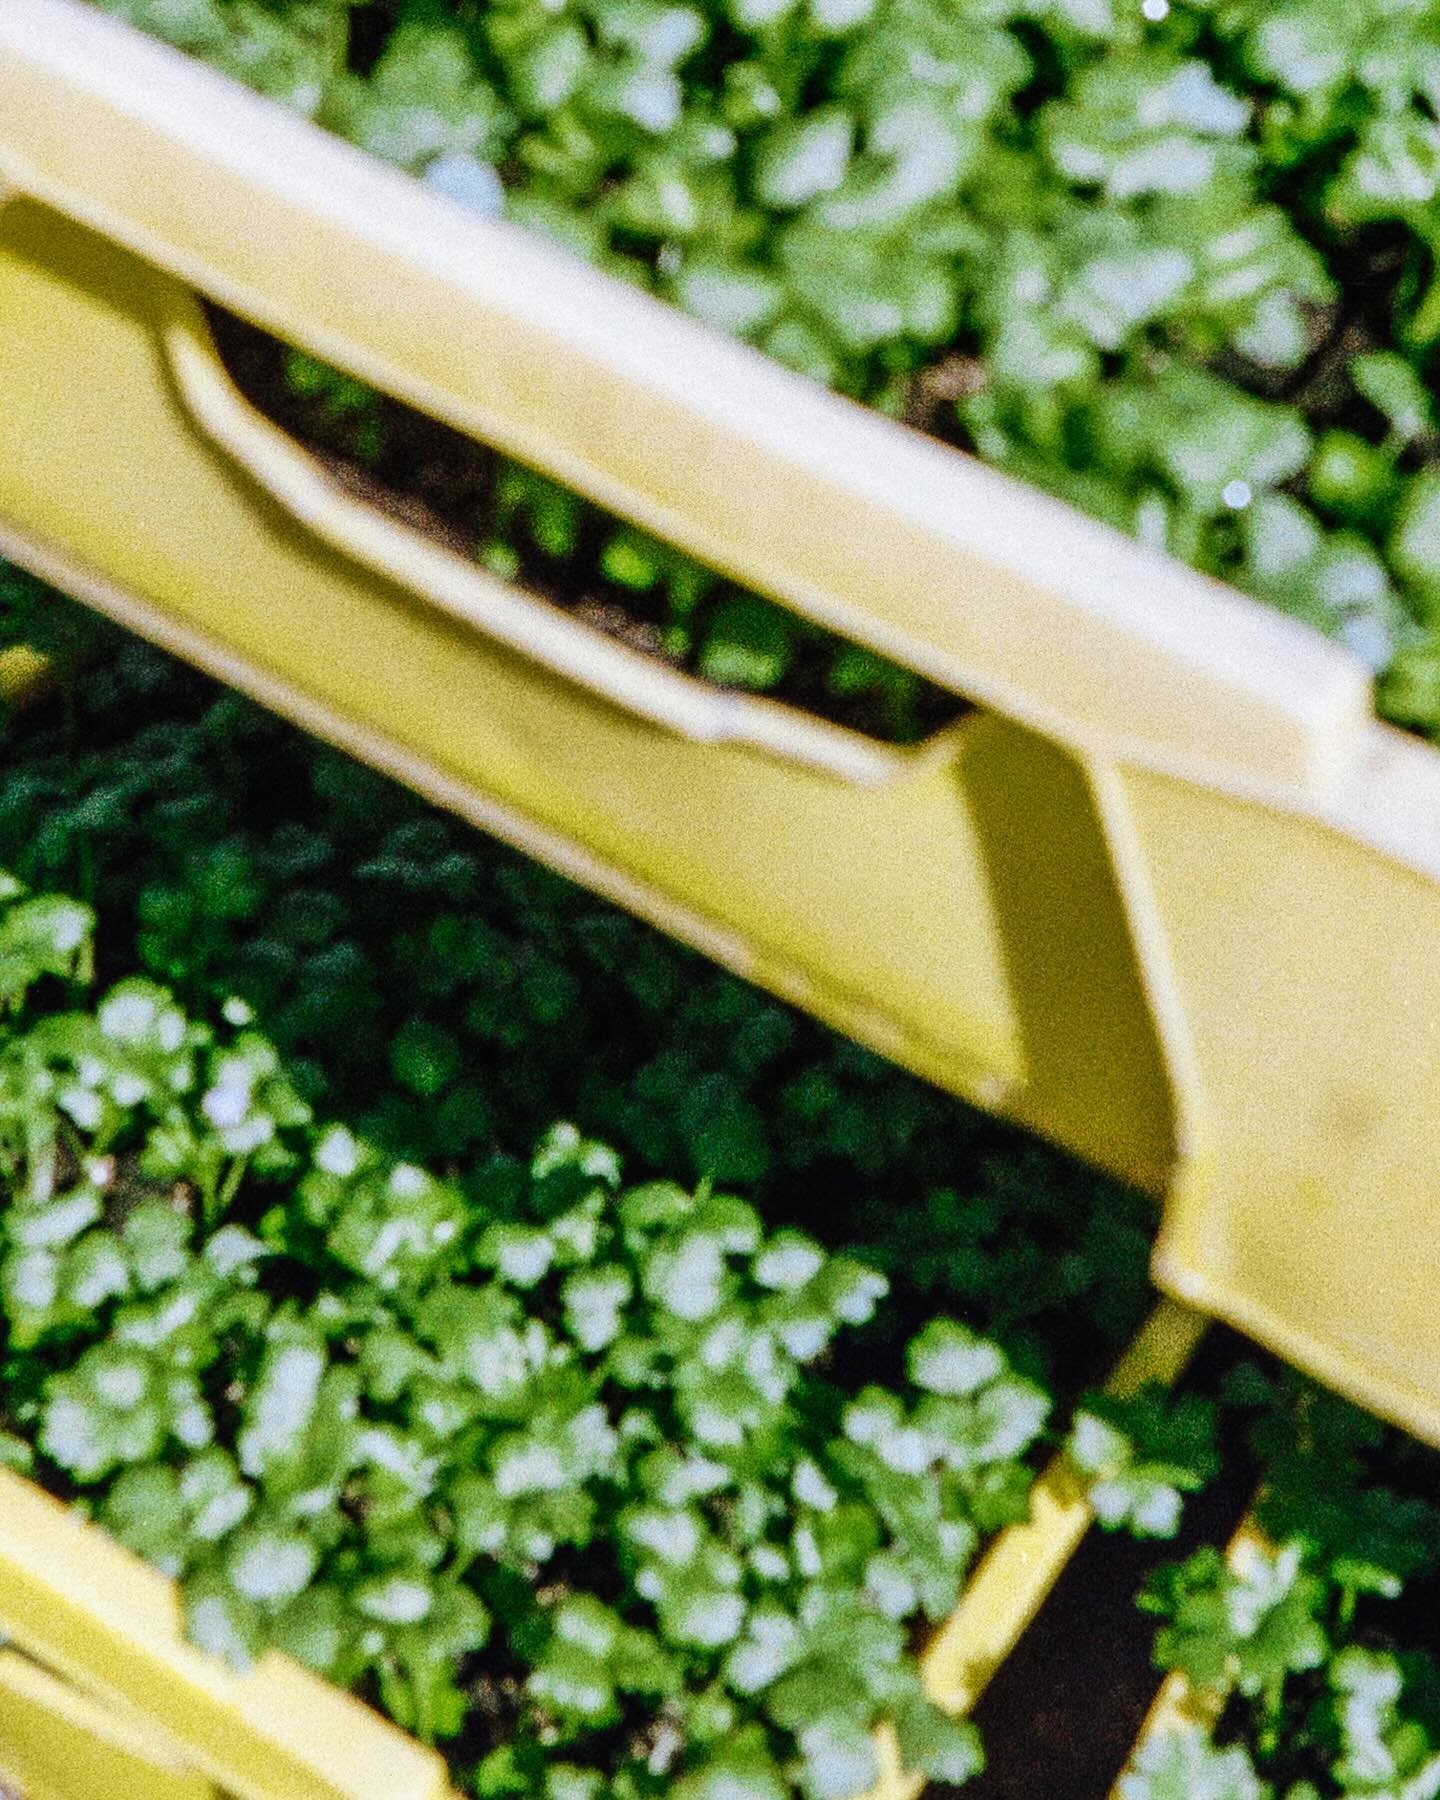 THE CITY FARMERS

For four seasons, @amk.atelier and I will follow the journey of the Amsterdam vegetable farm &lsquo;De Stadsgroenteboer.&rsquo; Each season will be documented on film and through interviews, to learn about their work and see how it&